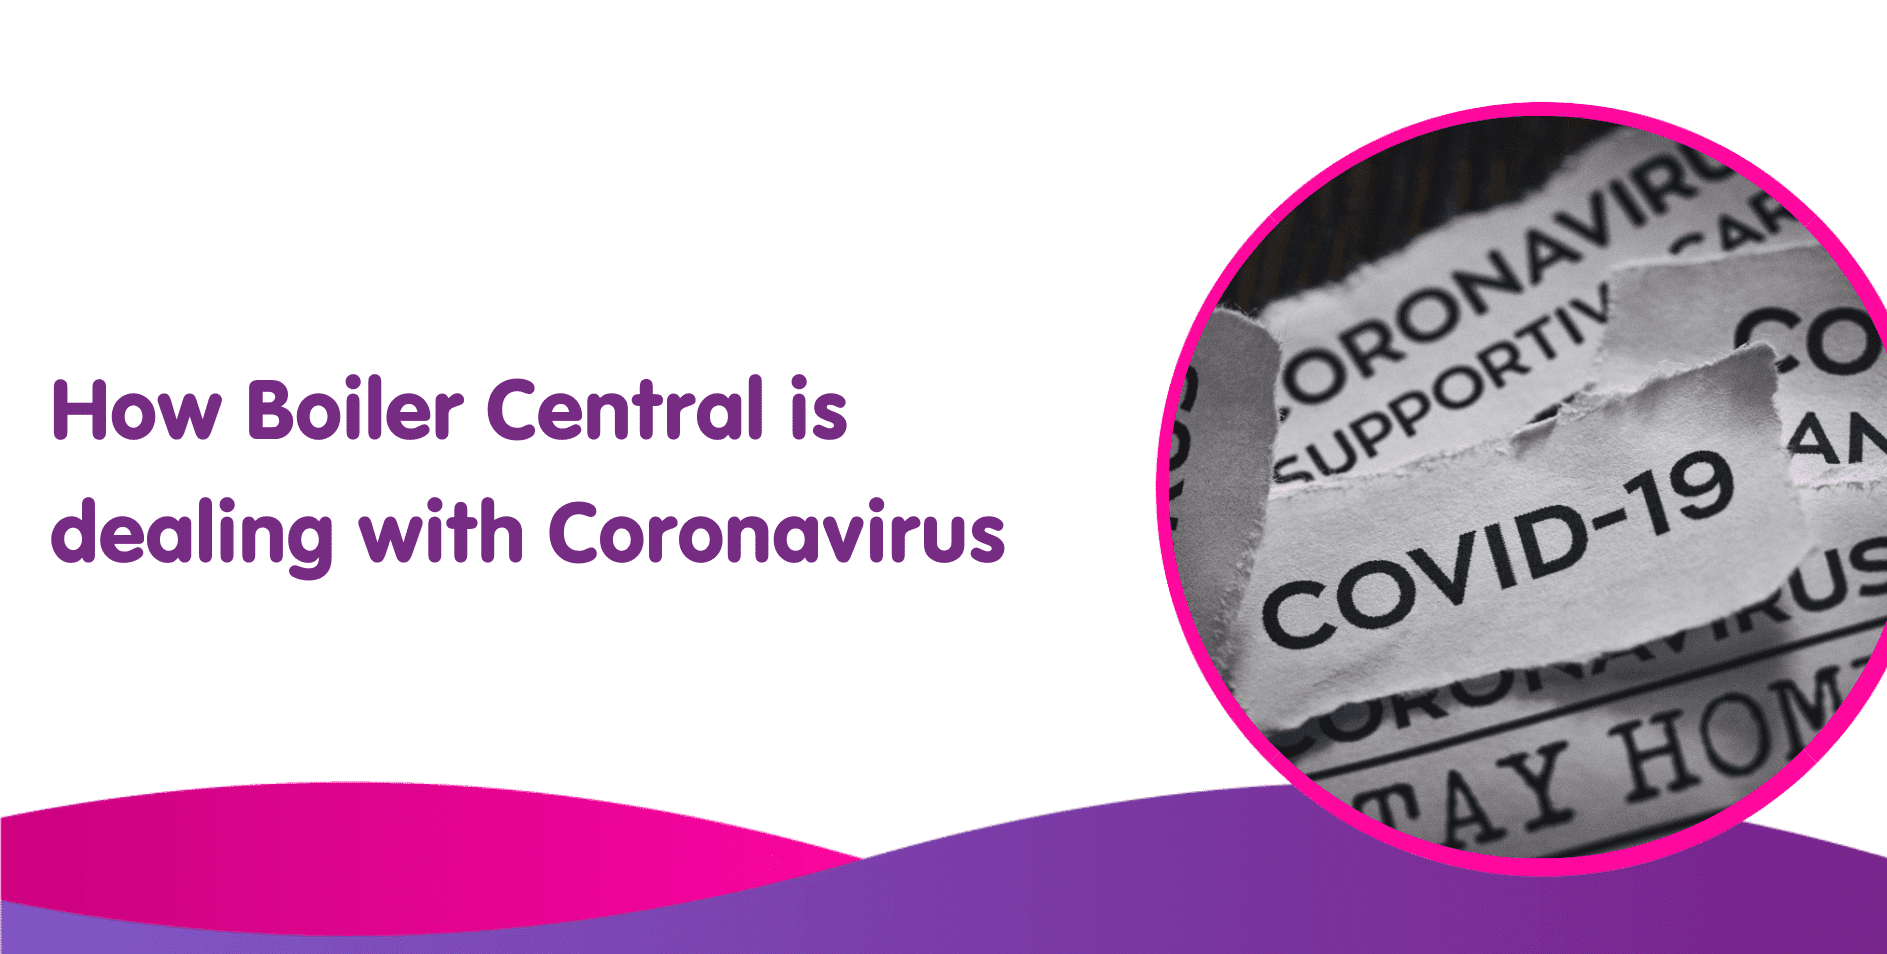 How Boiler Central is dealing with Coronavirus